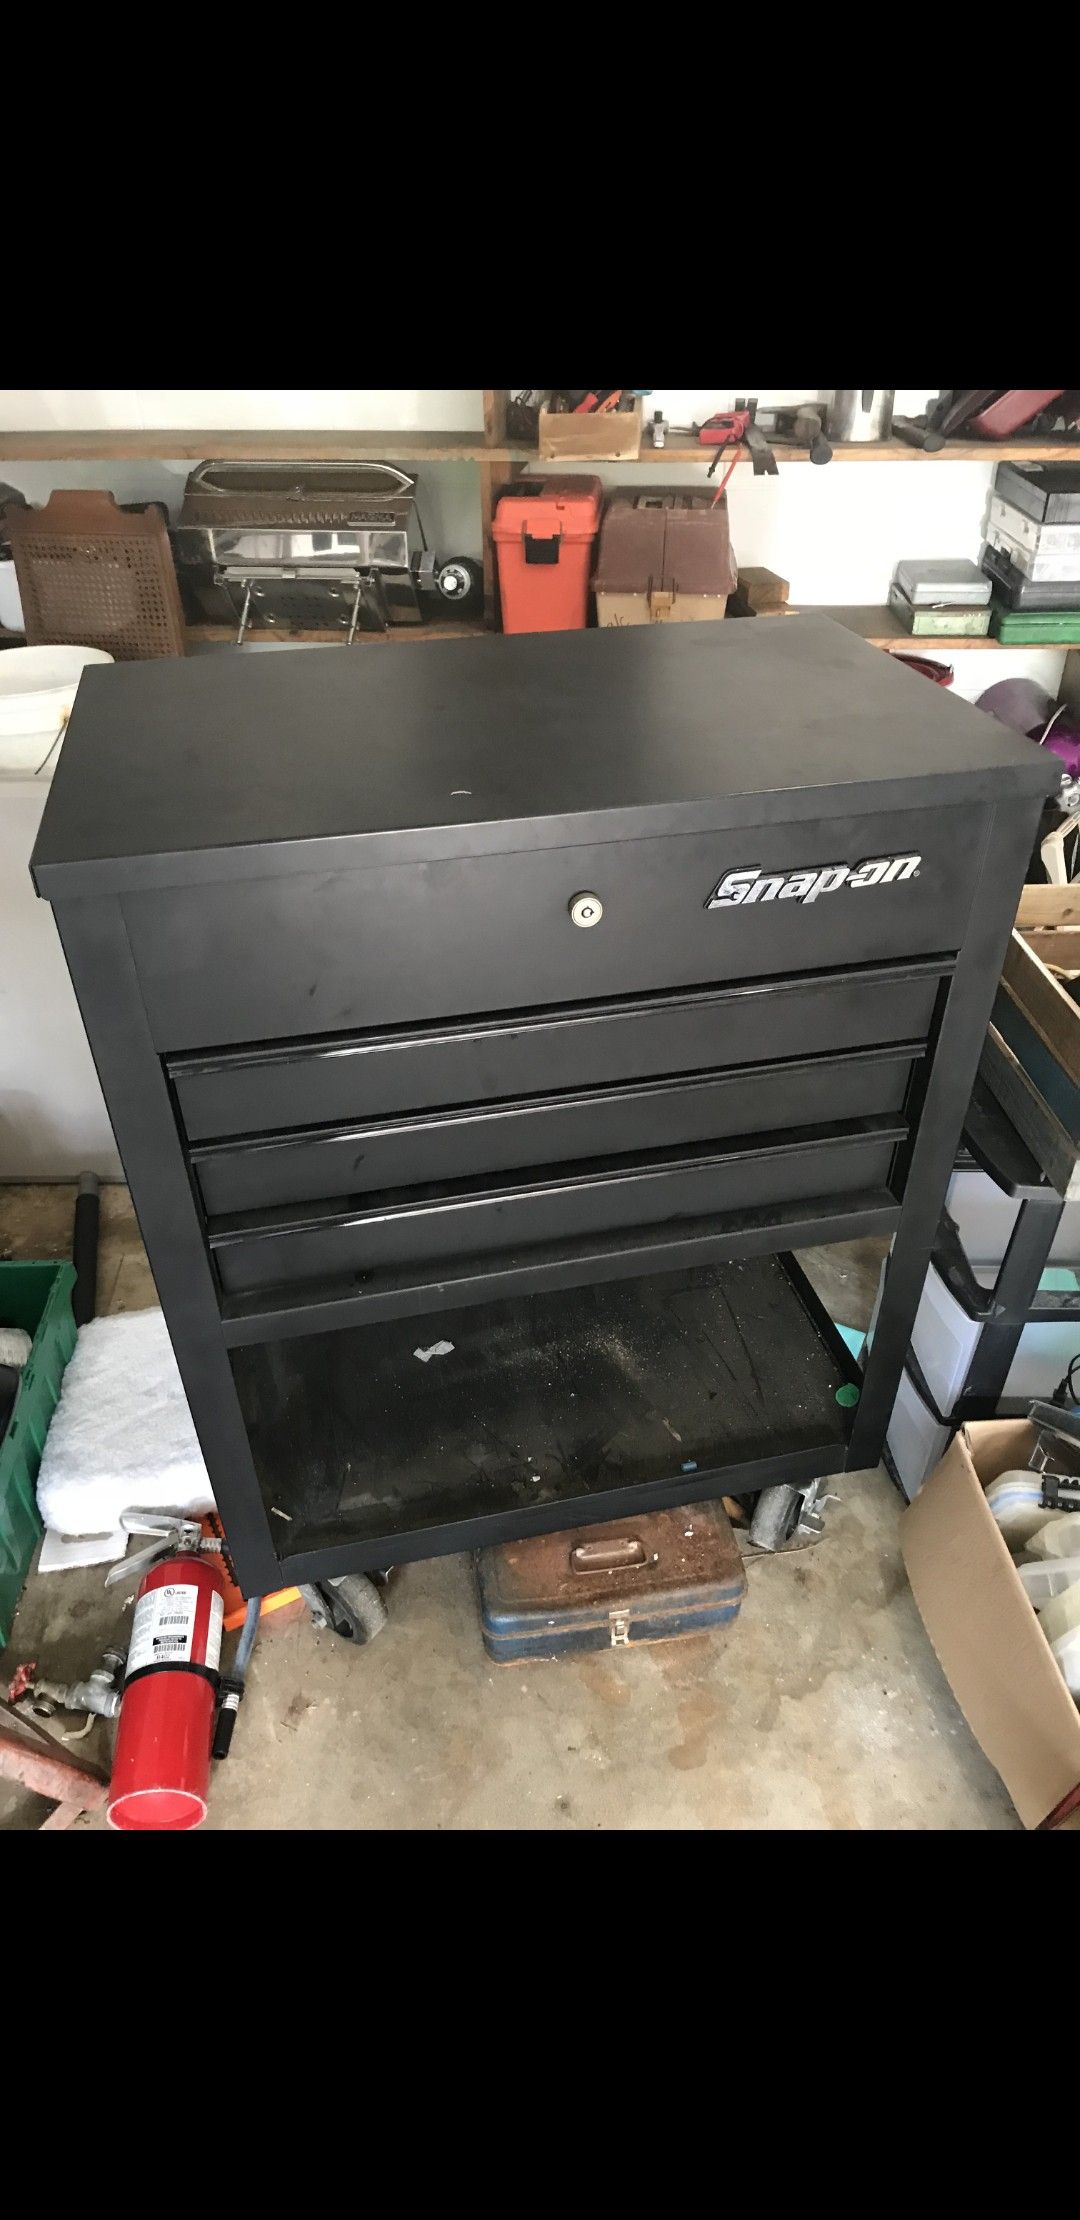 Snap on tool cart for sale or trade